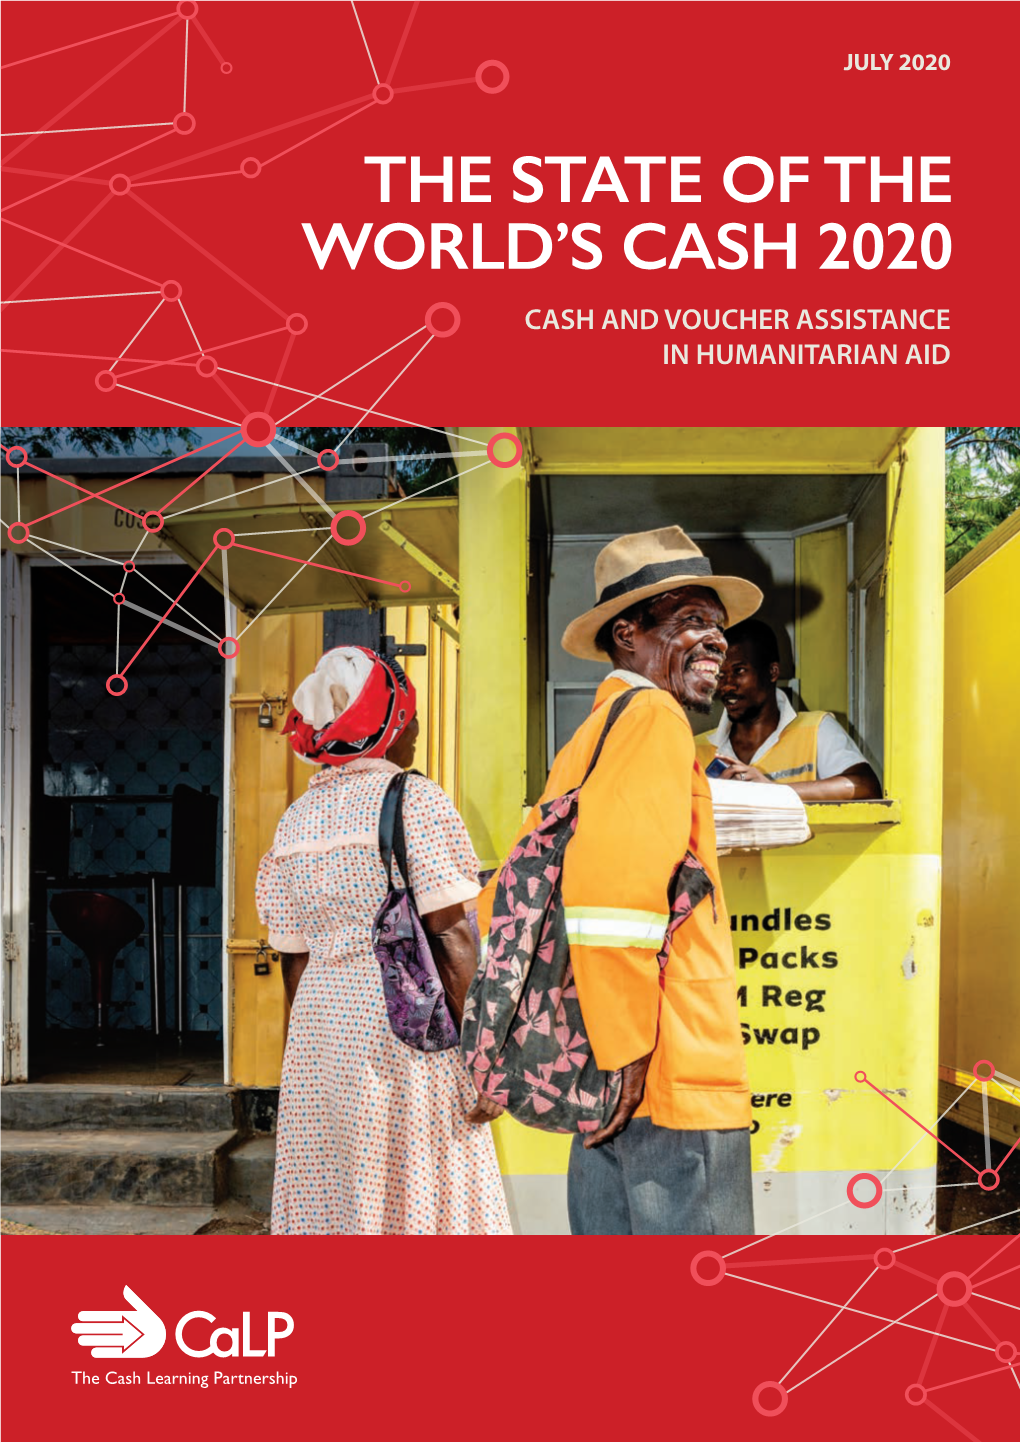 The State of the World's Cash 2020